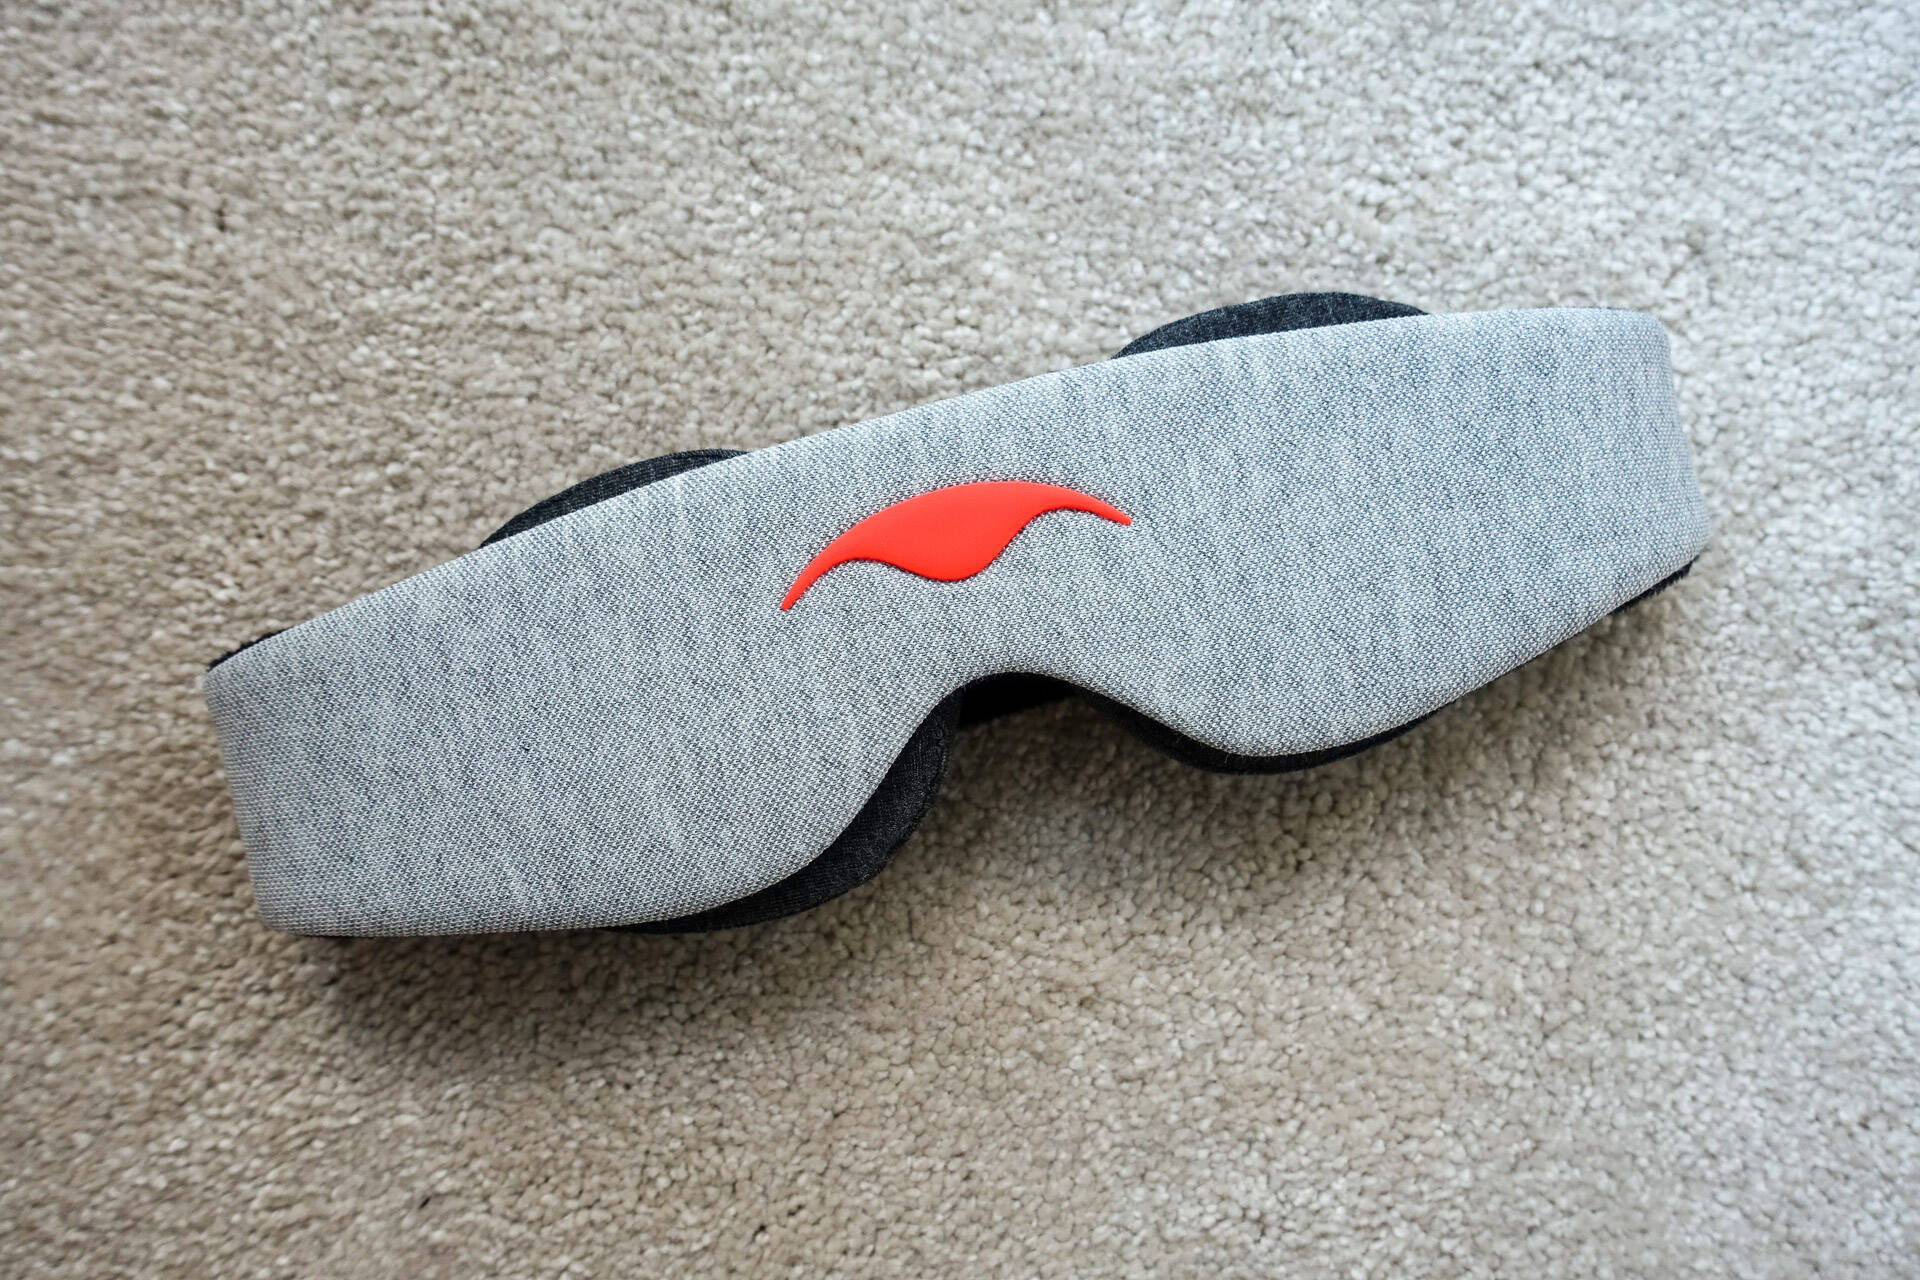 Super Sleeper Pro Weighted Eye Mask With Hot Or Cold Therapy